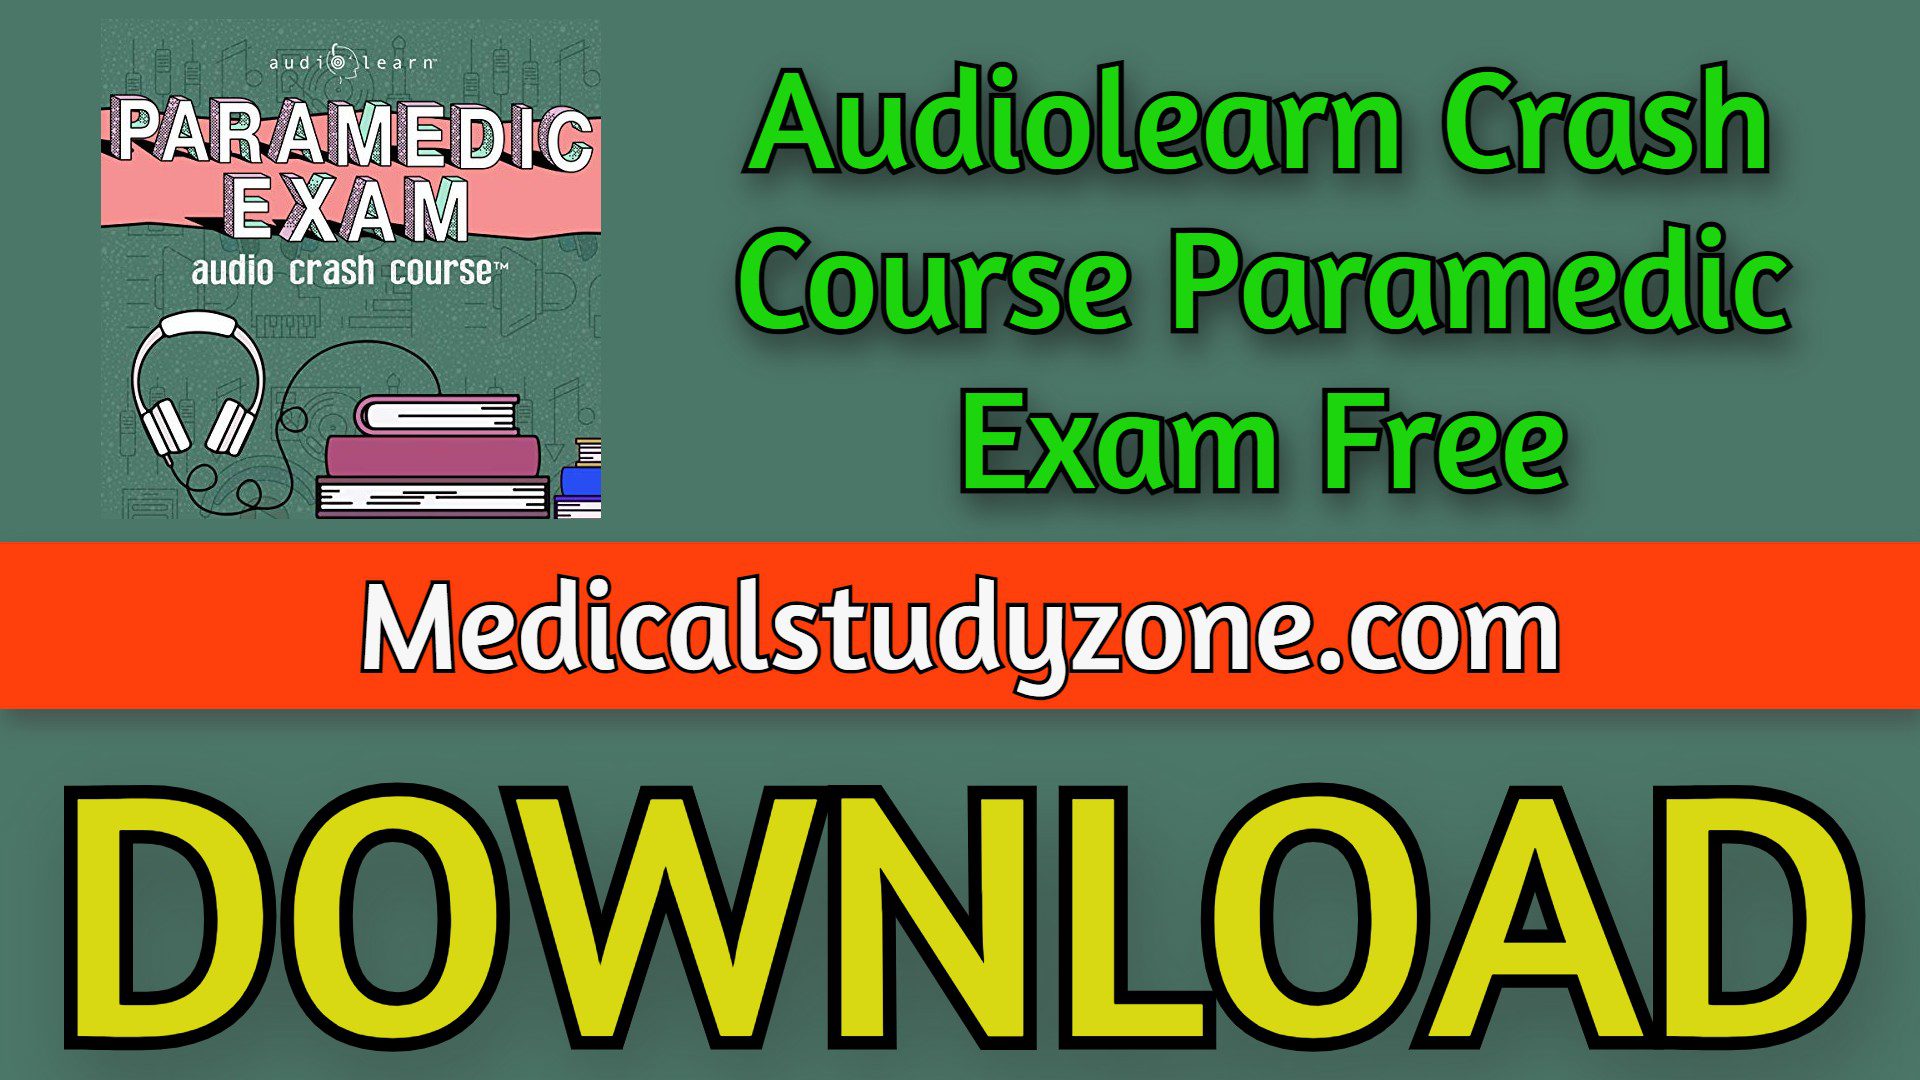 Audiolearn Crash Course Paramedic Exam 2021 Free Download